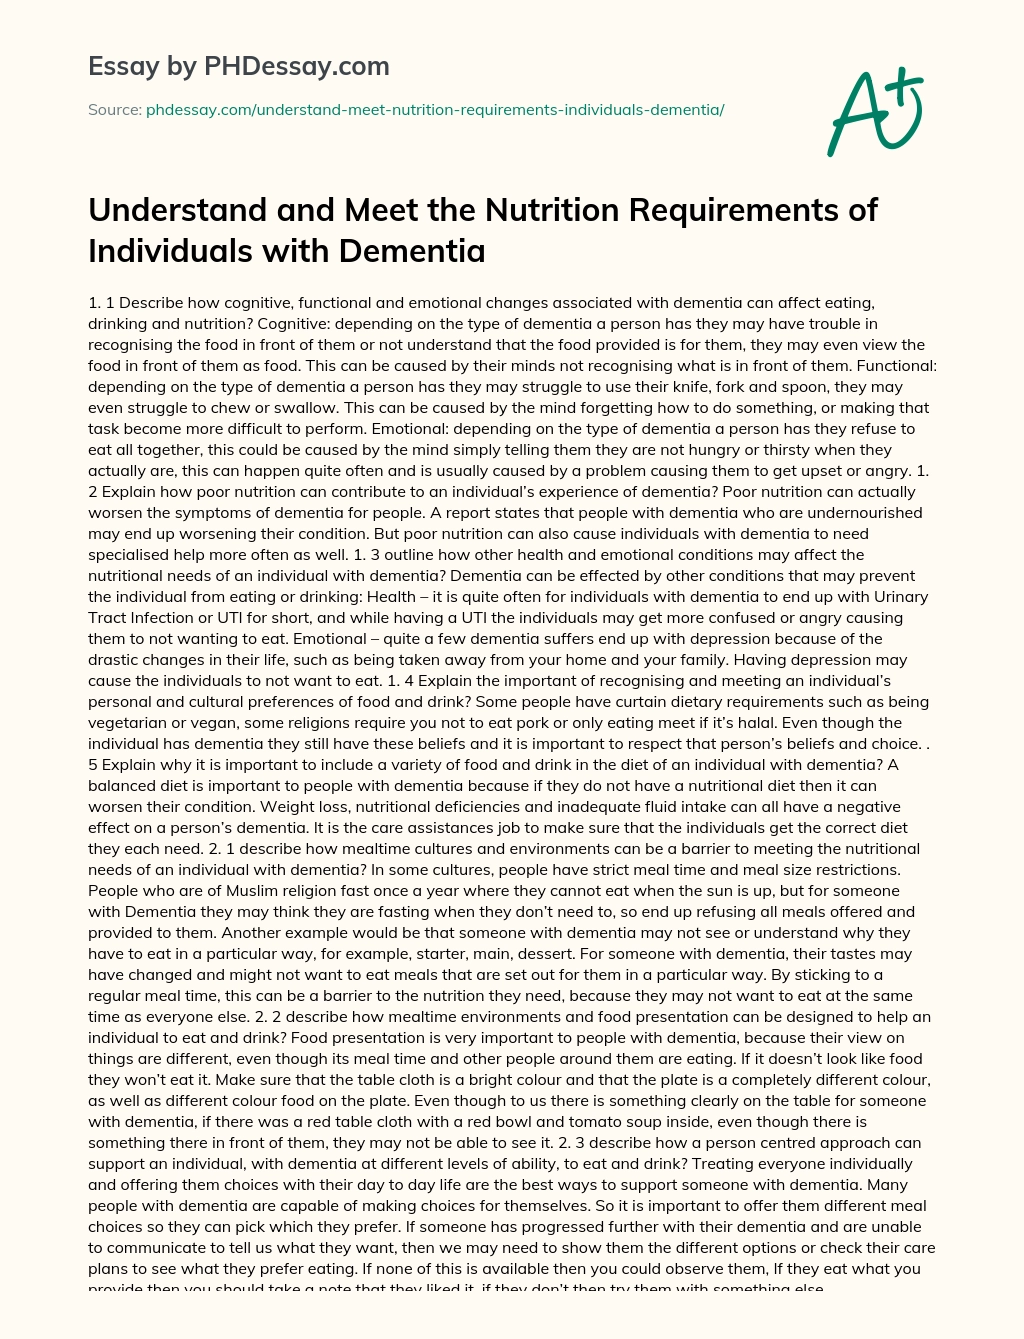 Understand and Meet the Nutrition Requirements of Individuals with Dementia essay